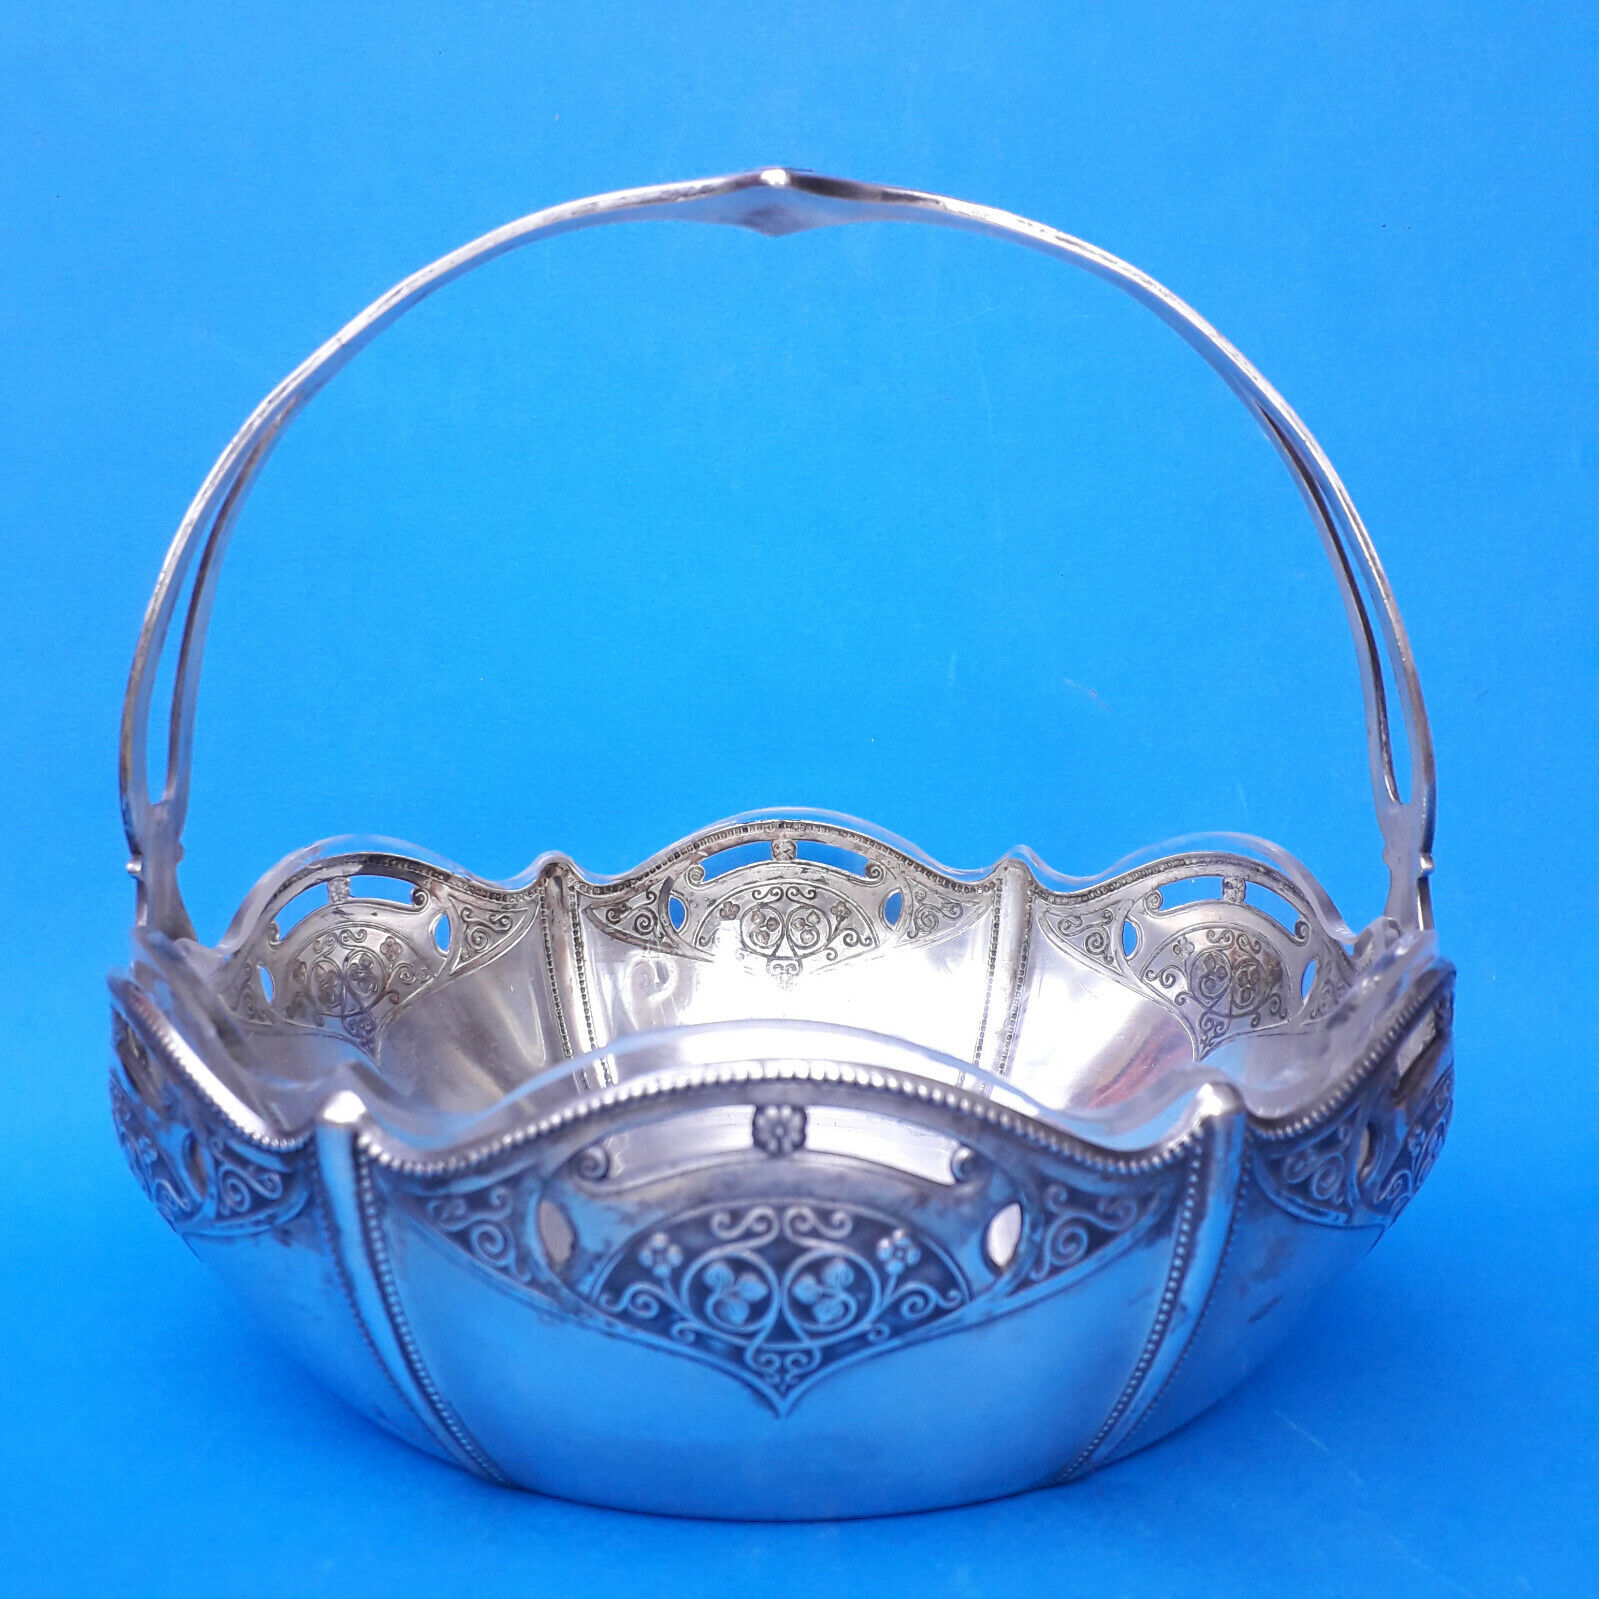 ART NOUVEAU Silver Plated Fruit Basket with Glass Liner  - Unmarked WMF ?